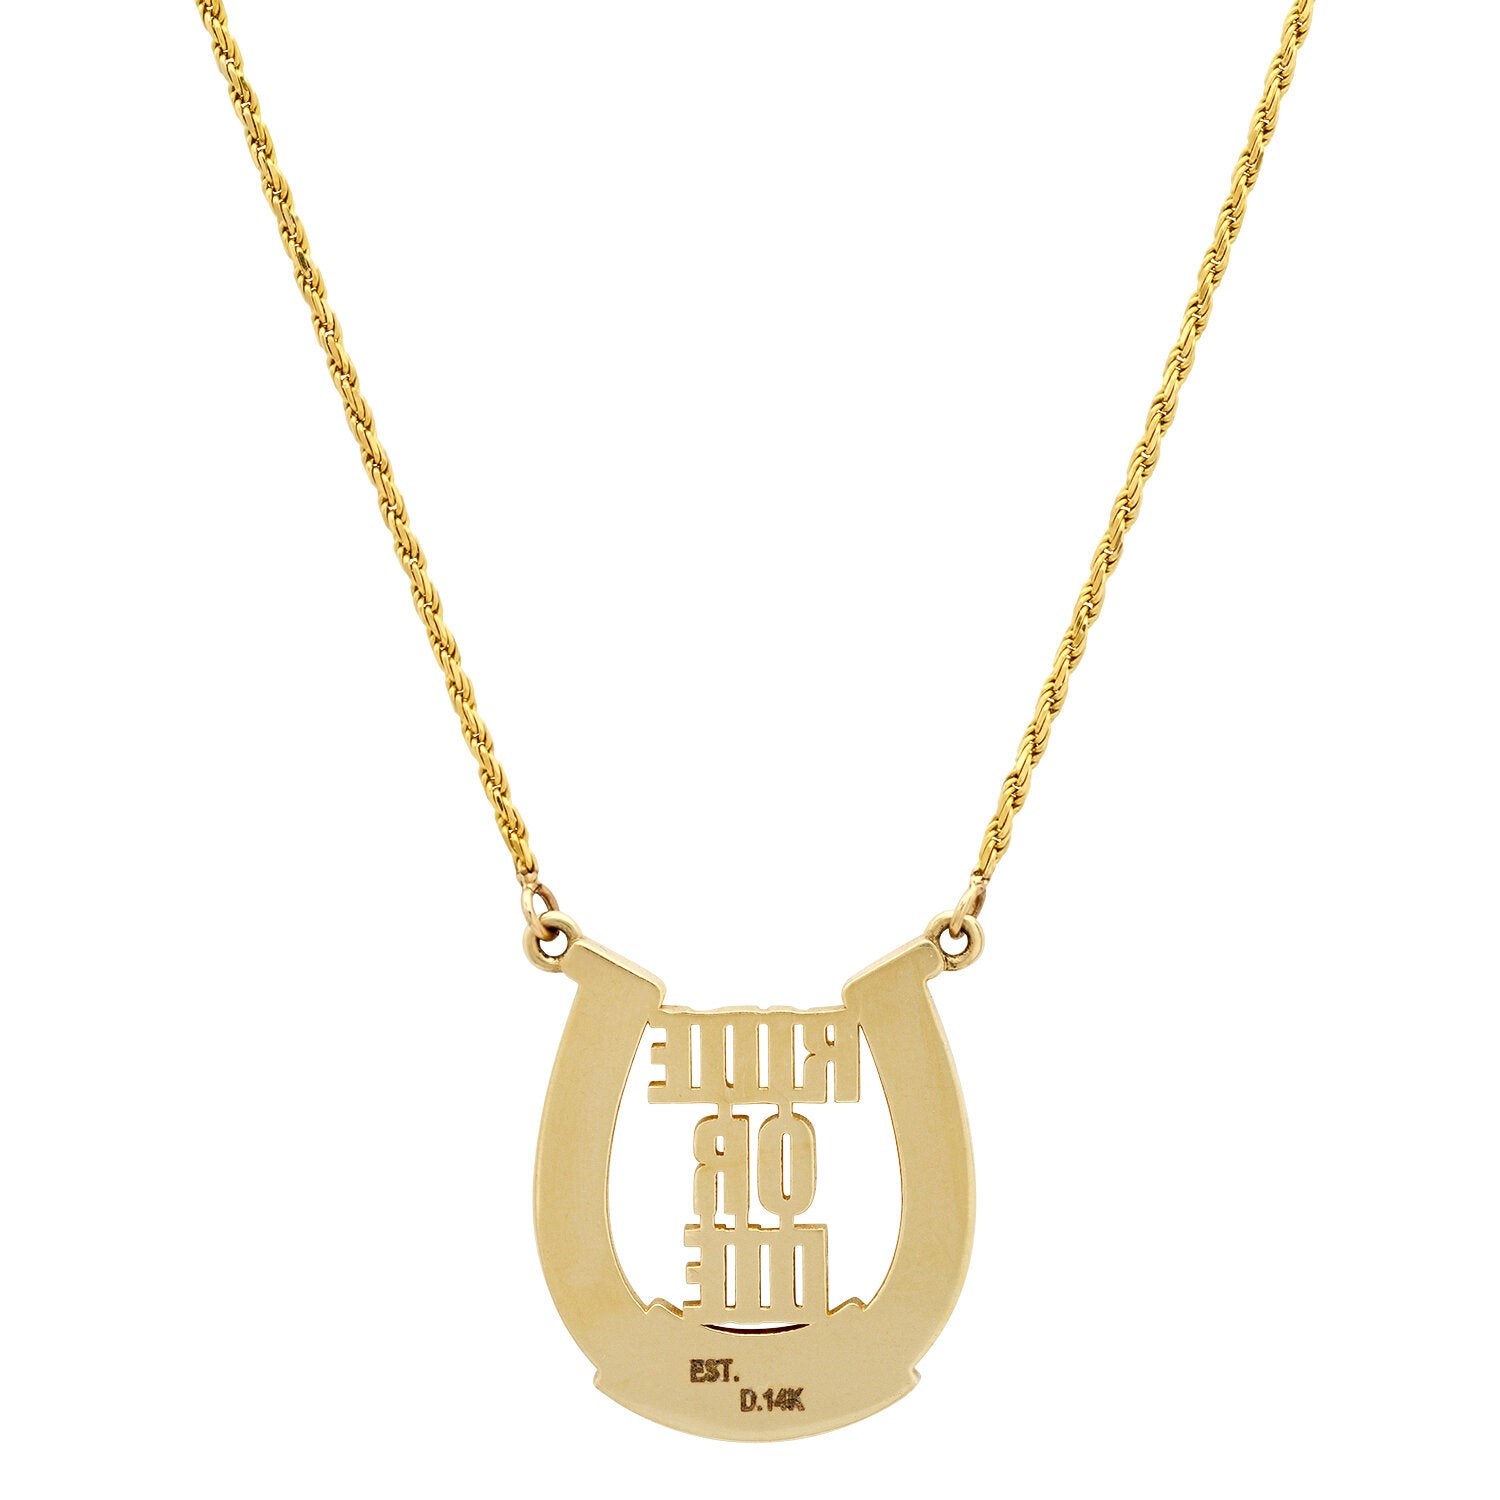 Ride or Die Horseshoe Necklace